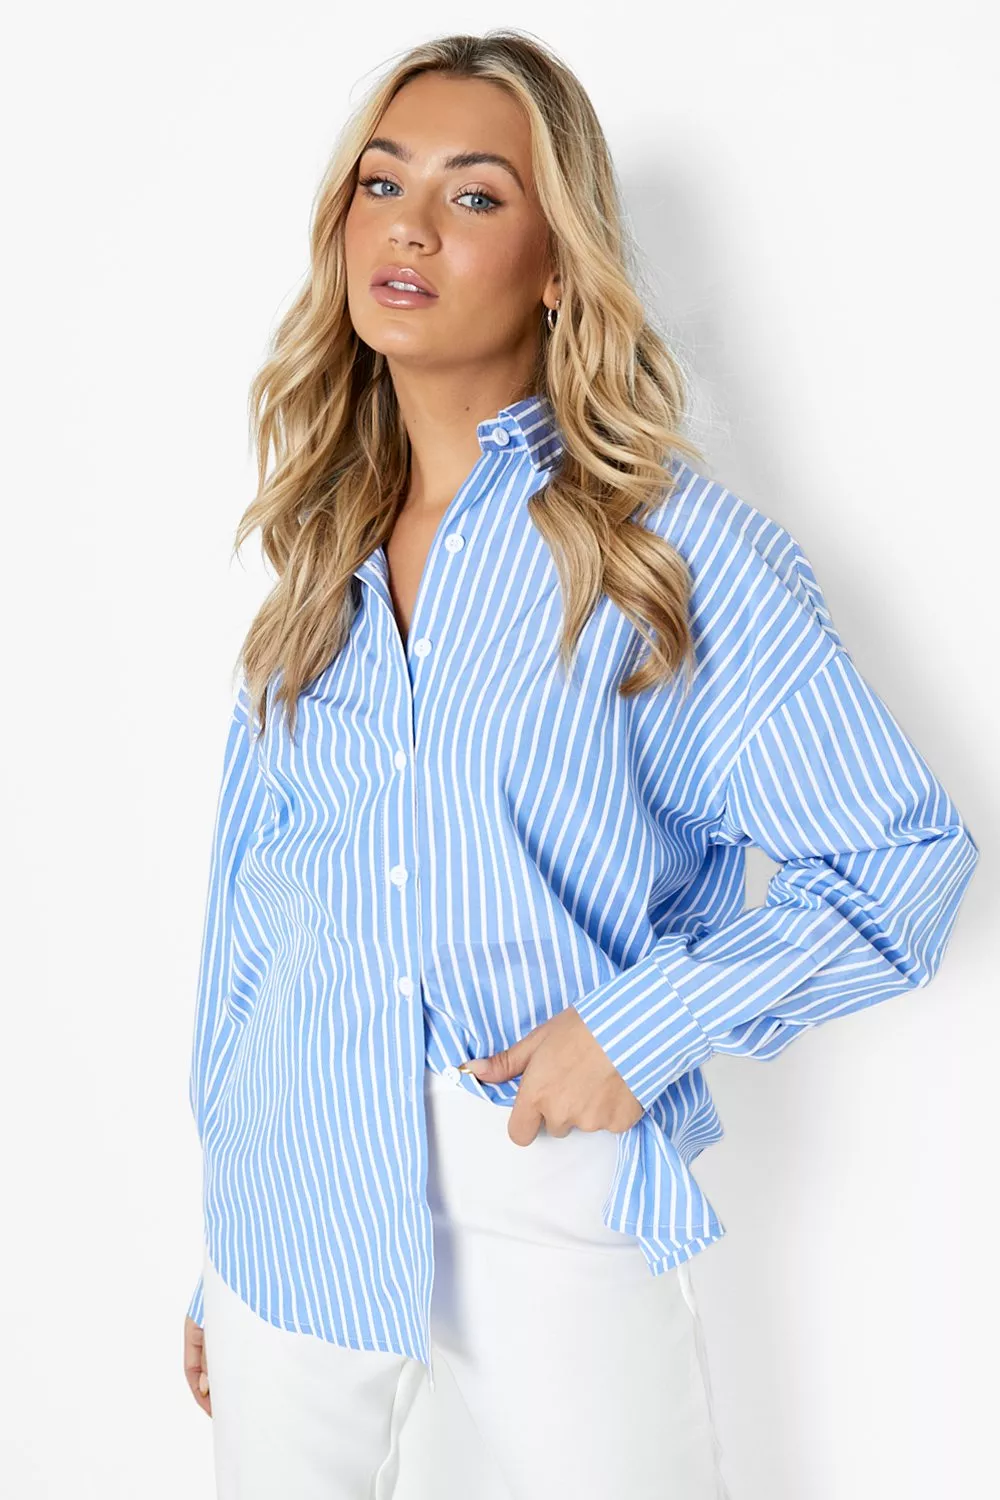 BLUE STRIPE OVERSIZED SHIRT Is £17.60, was £22.00 20% OFF